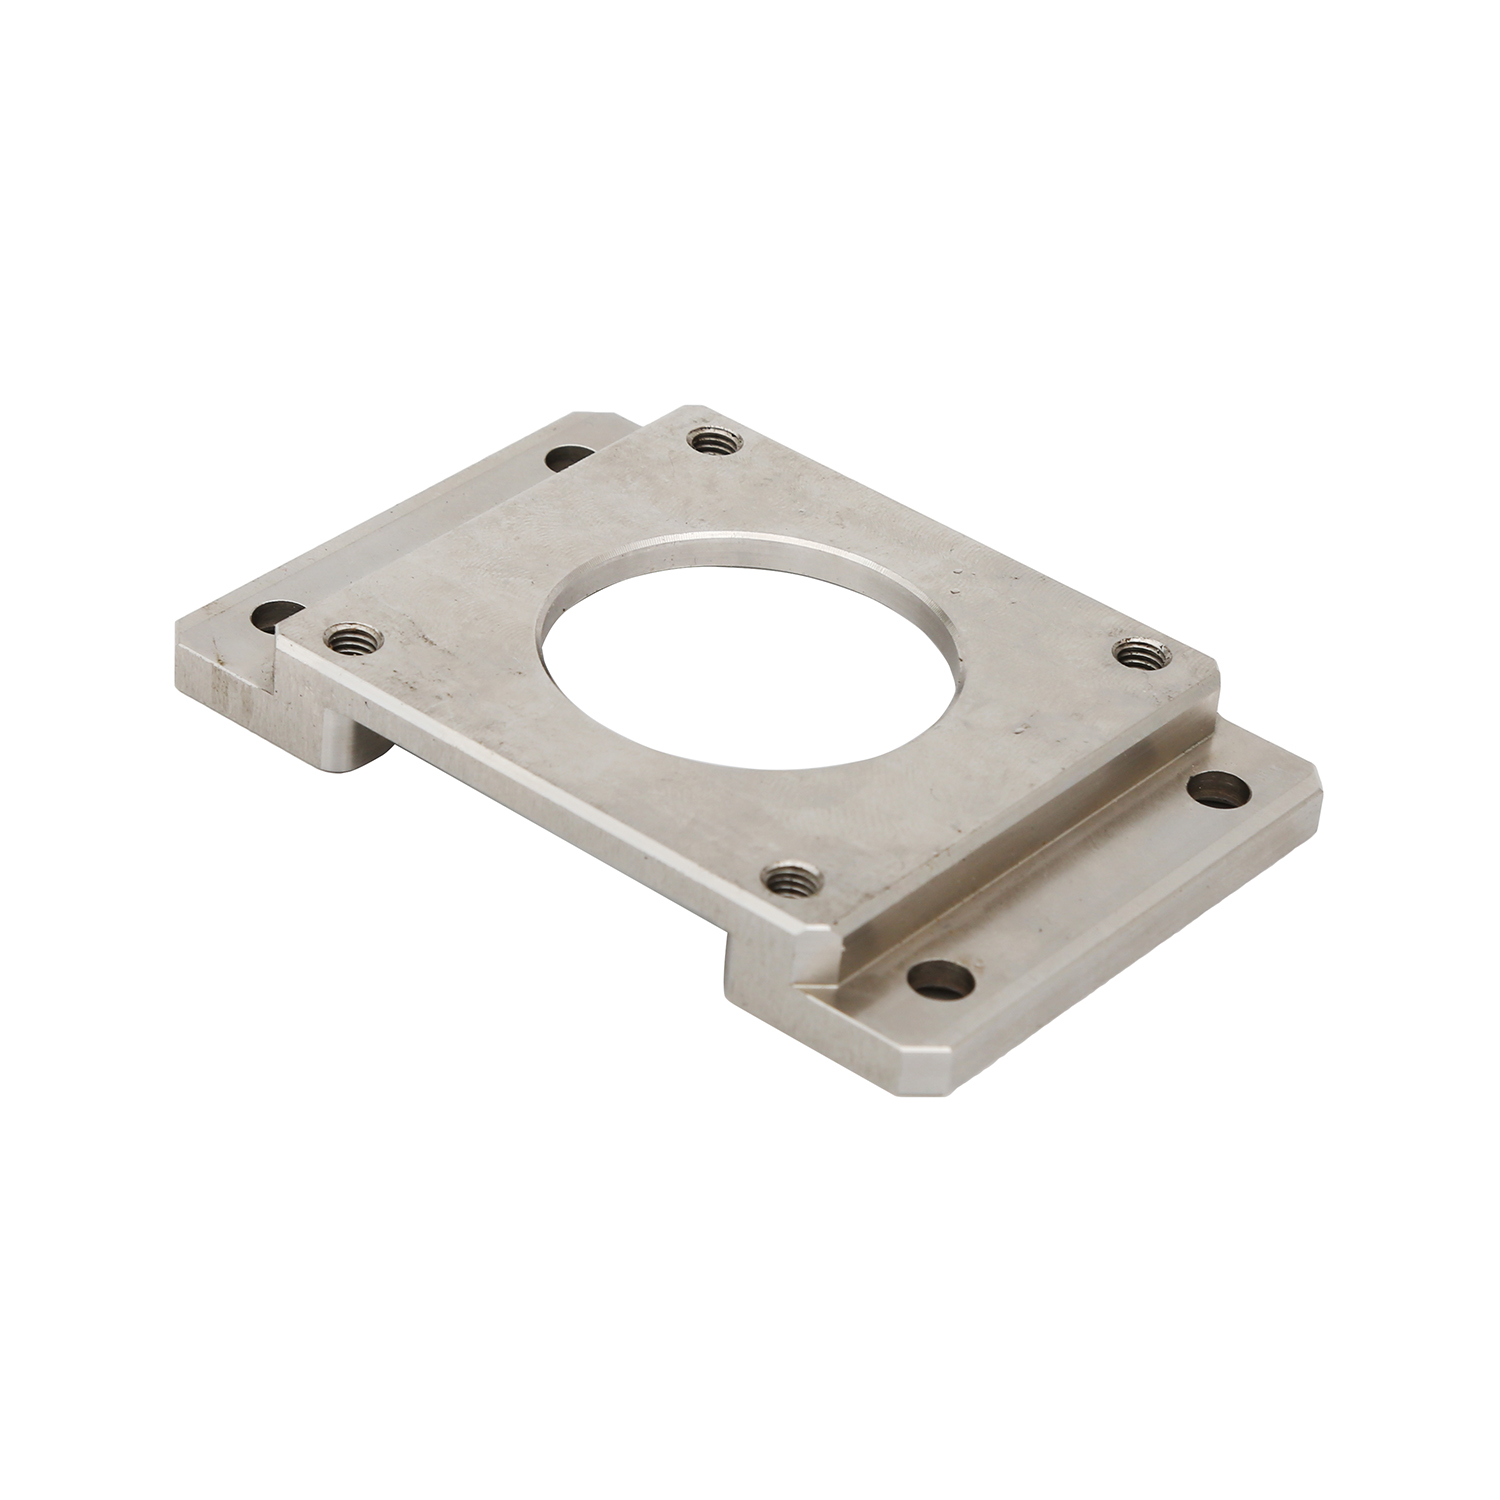 5 Axis CNCmachining Milling CNC Cutting Metal Stamping OEM Stainless Steel Mount Bracket